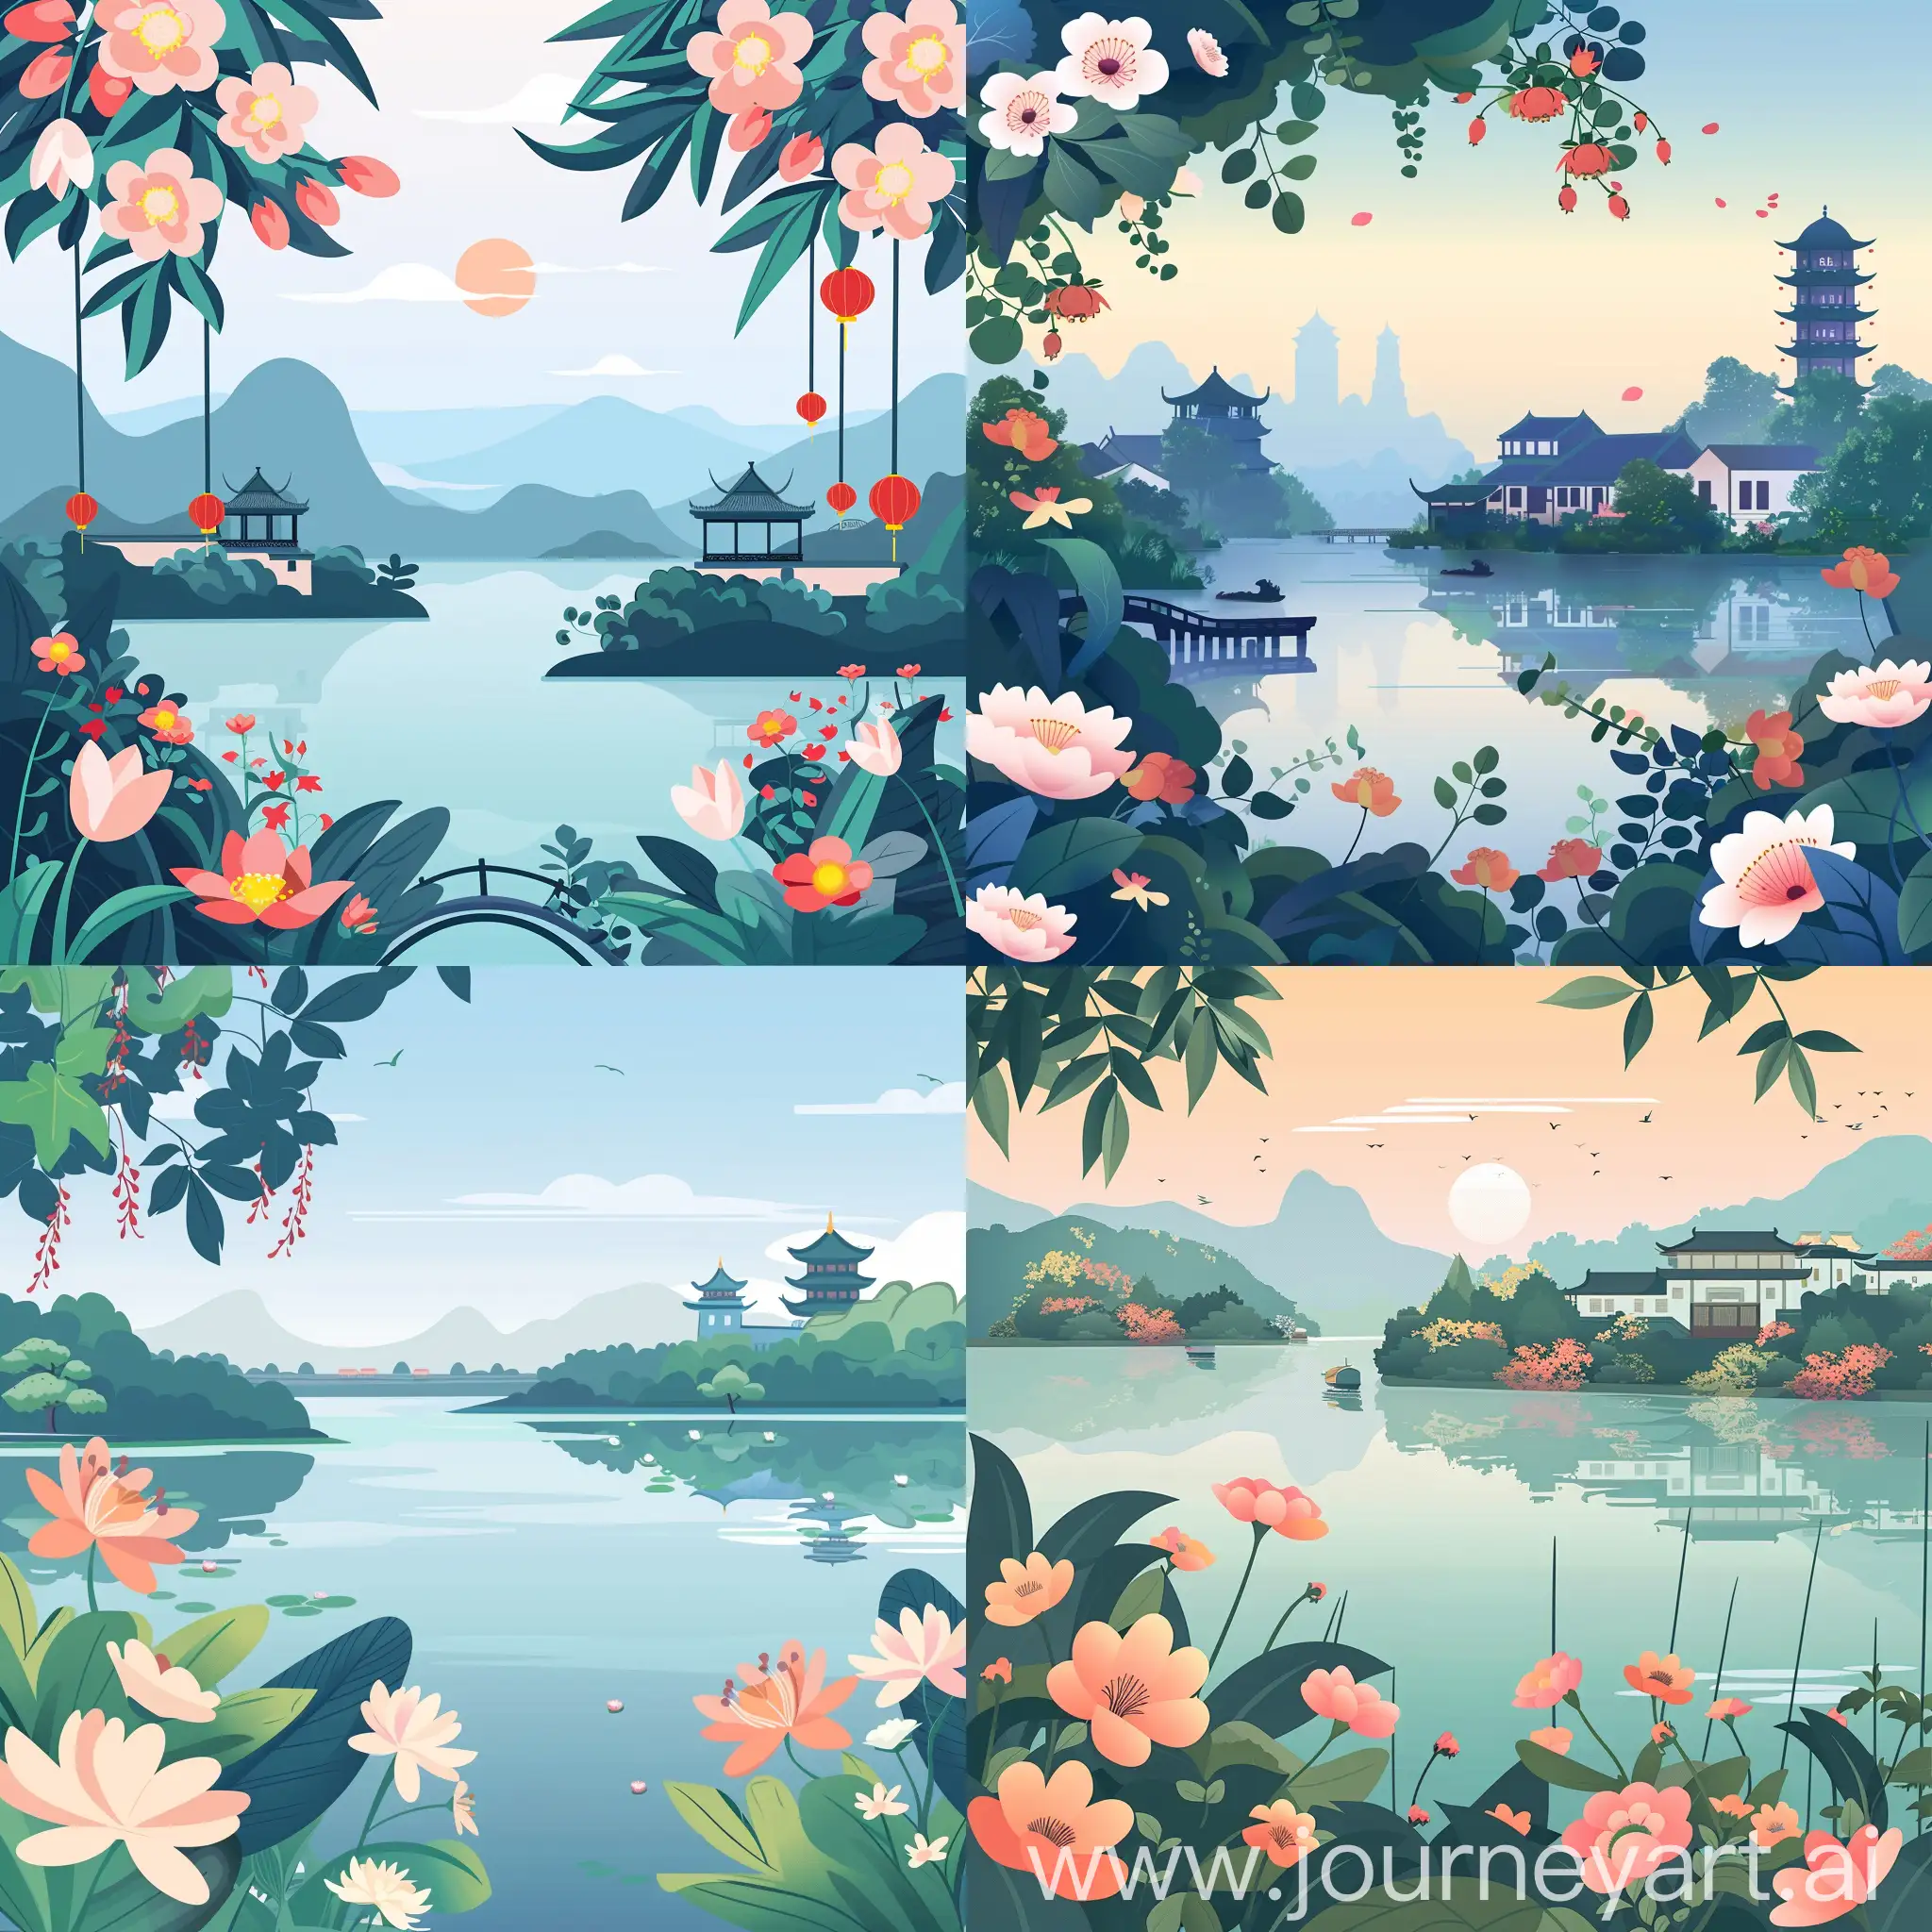 Flat illustration of Beautiful Hangzhou, with flowers and scenery, during the day, high quality details